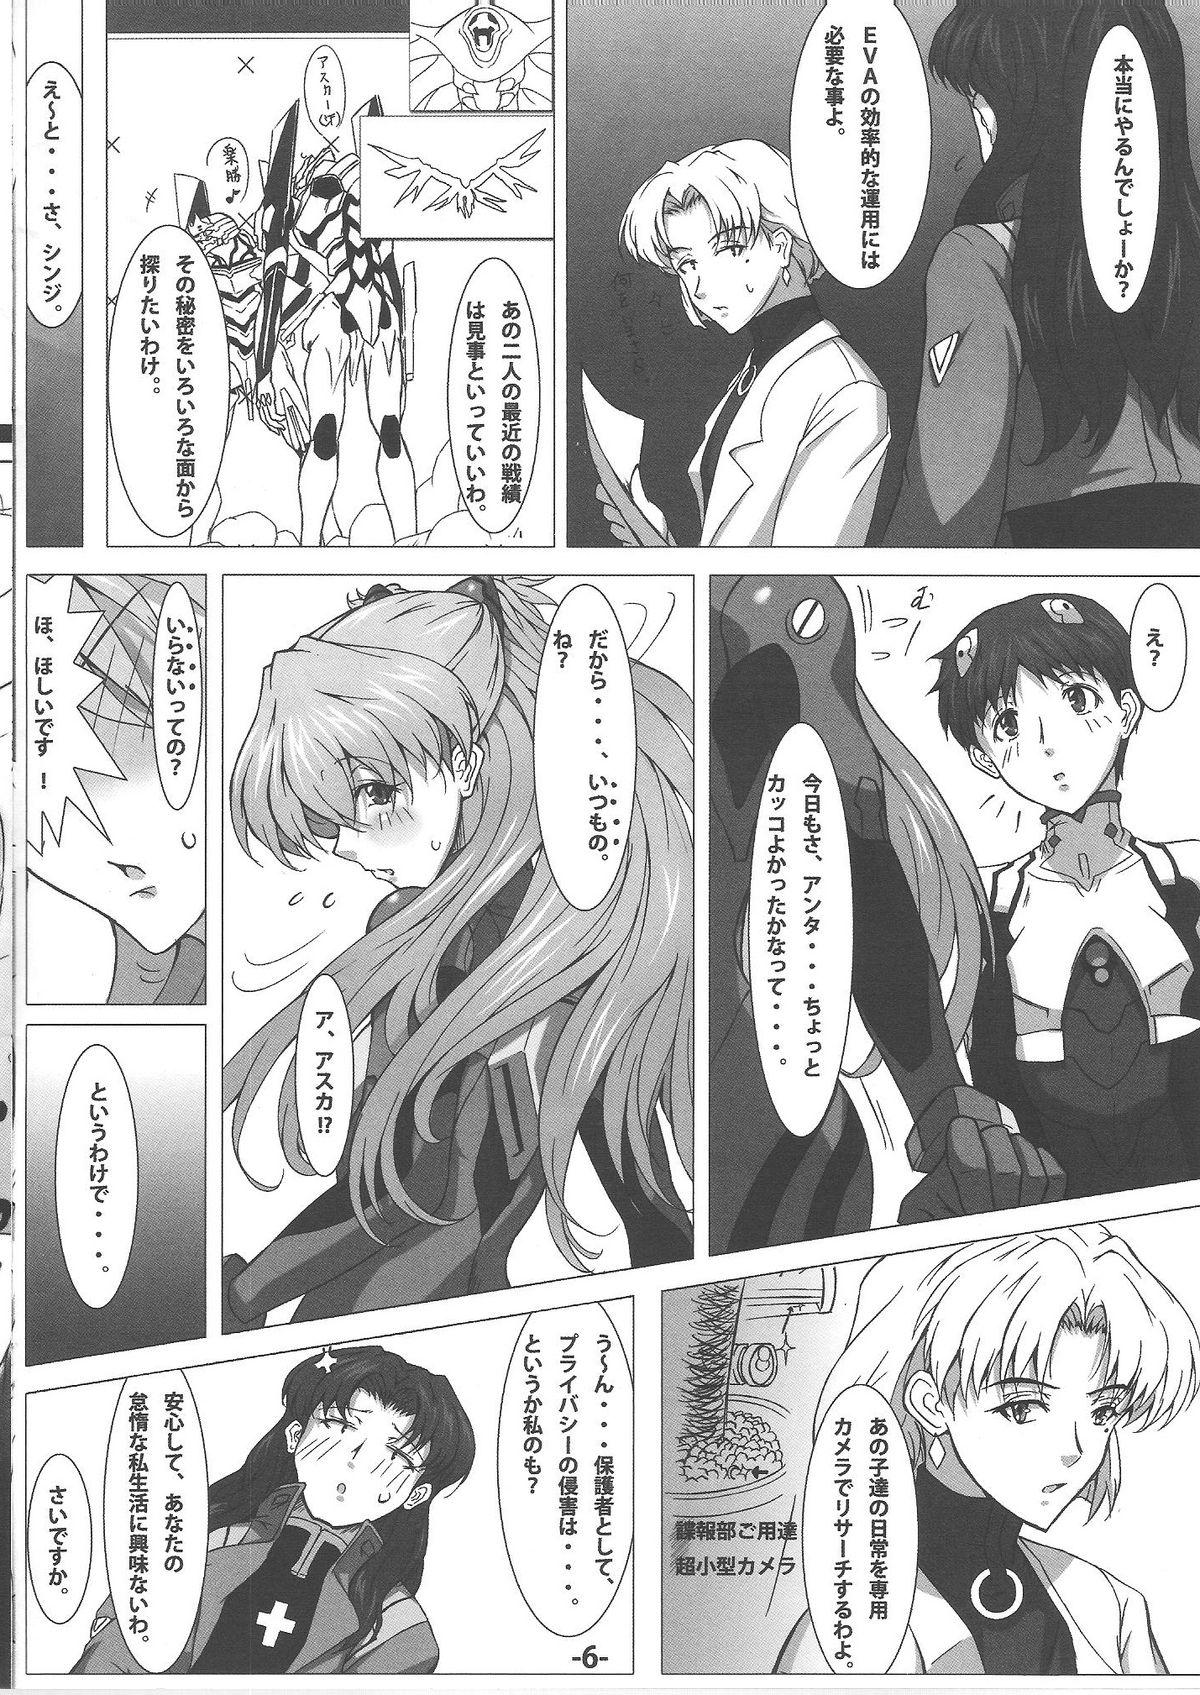 Tight Pussy Synchro Rate 200% !! - Neon genesis evangelion Blondes - Page 7